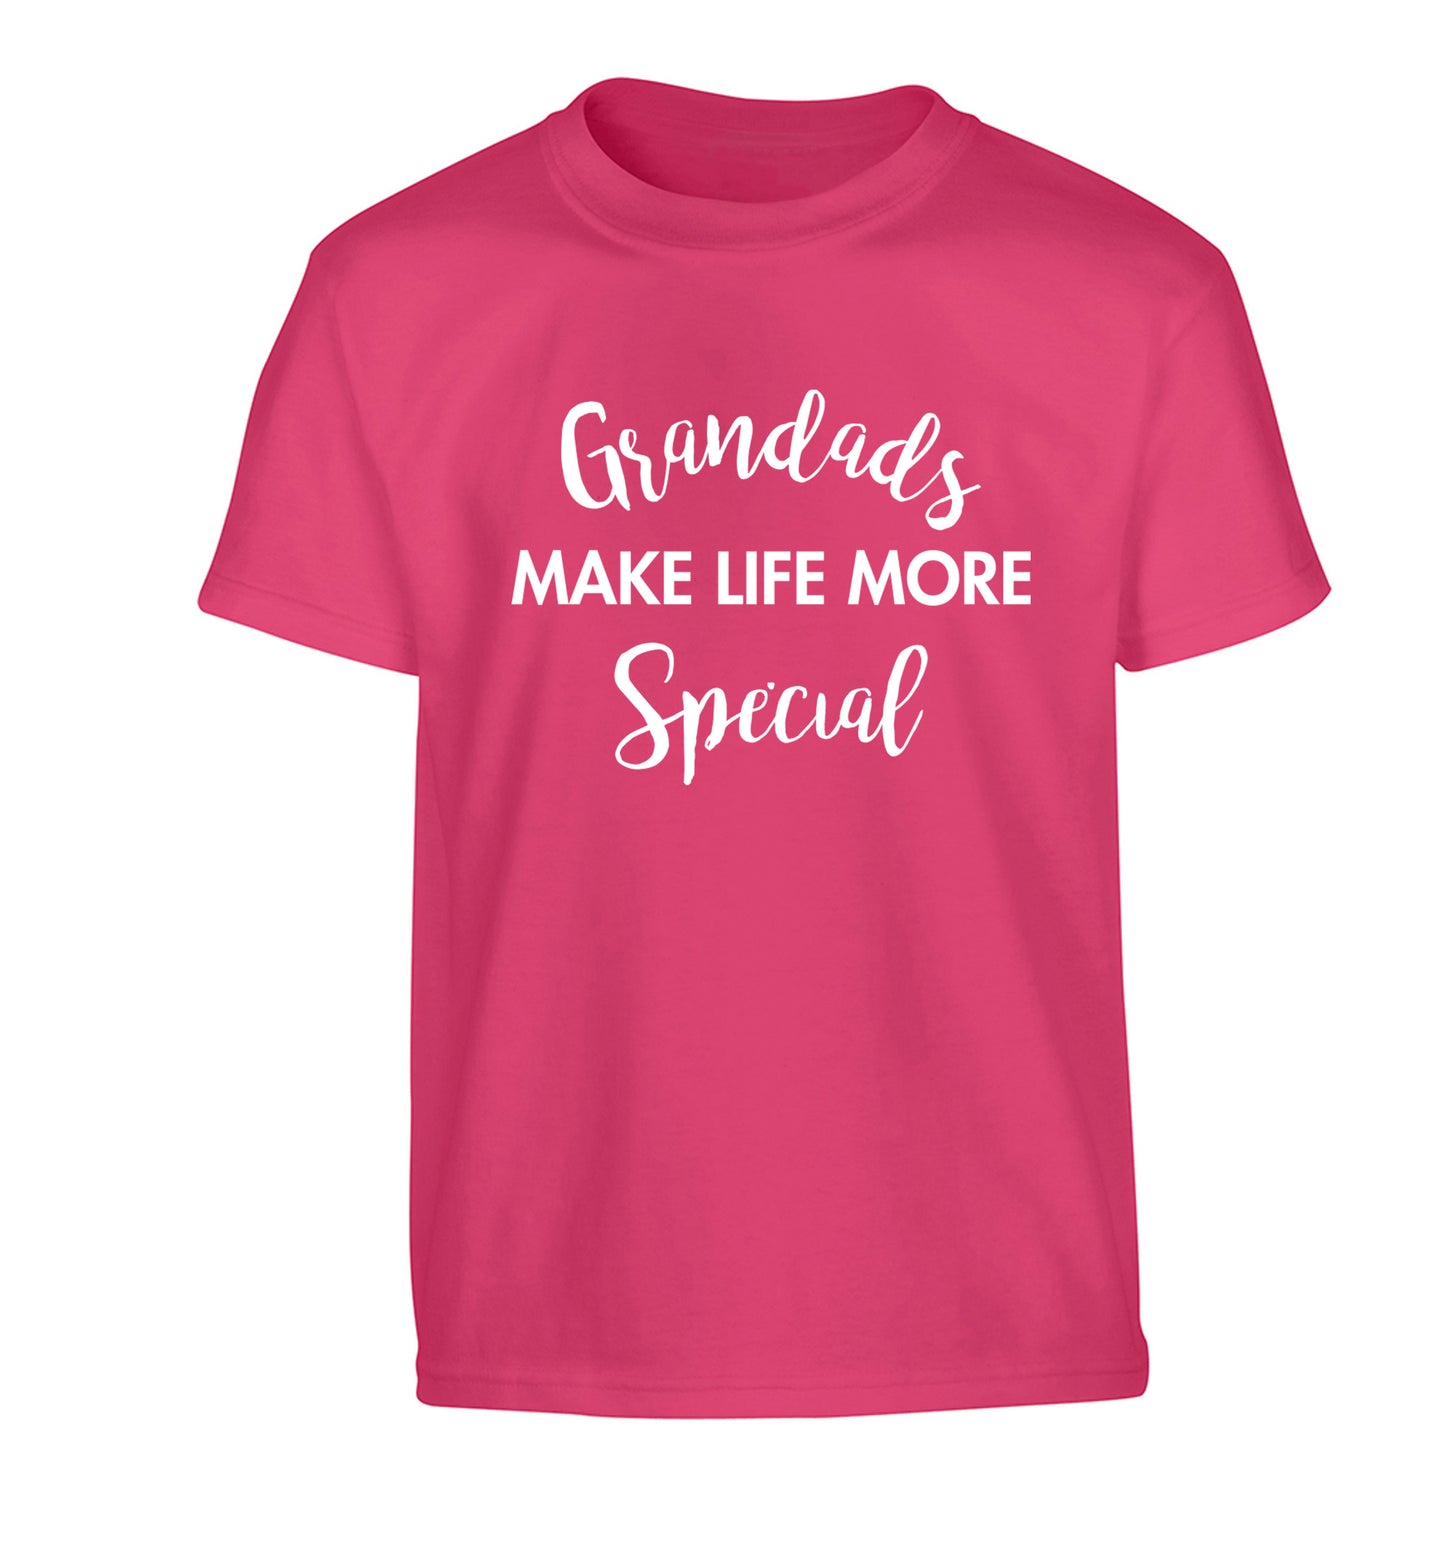 Grandads make life more special Children's pink Tshirt 12-14 Years